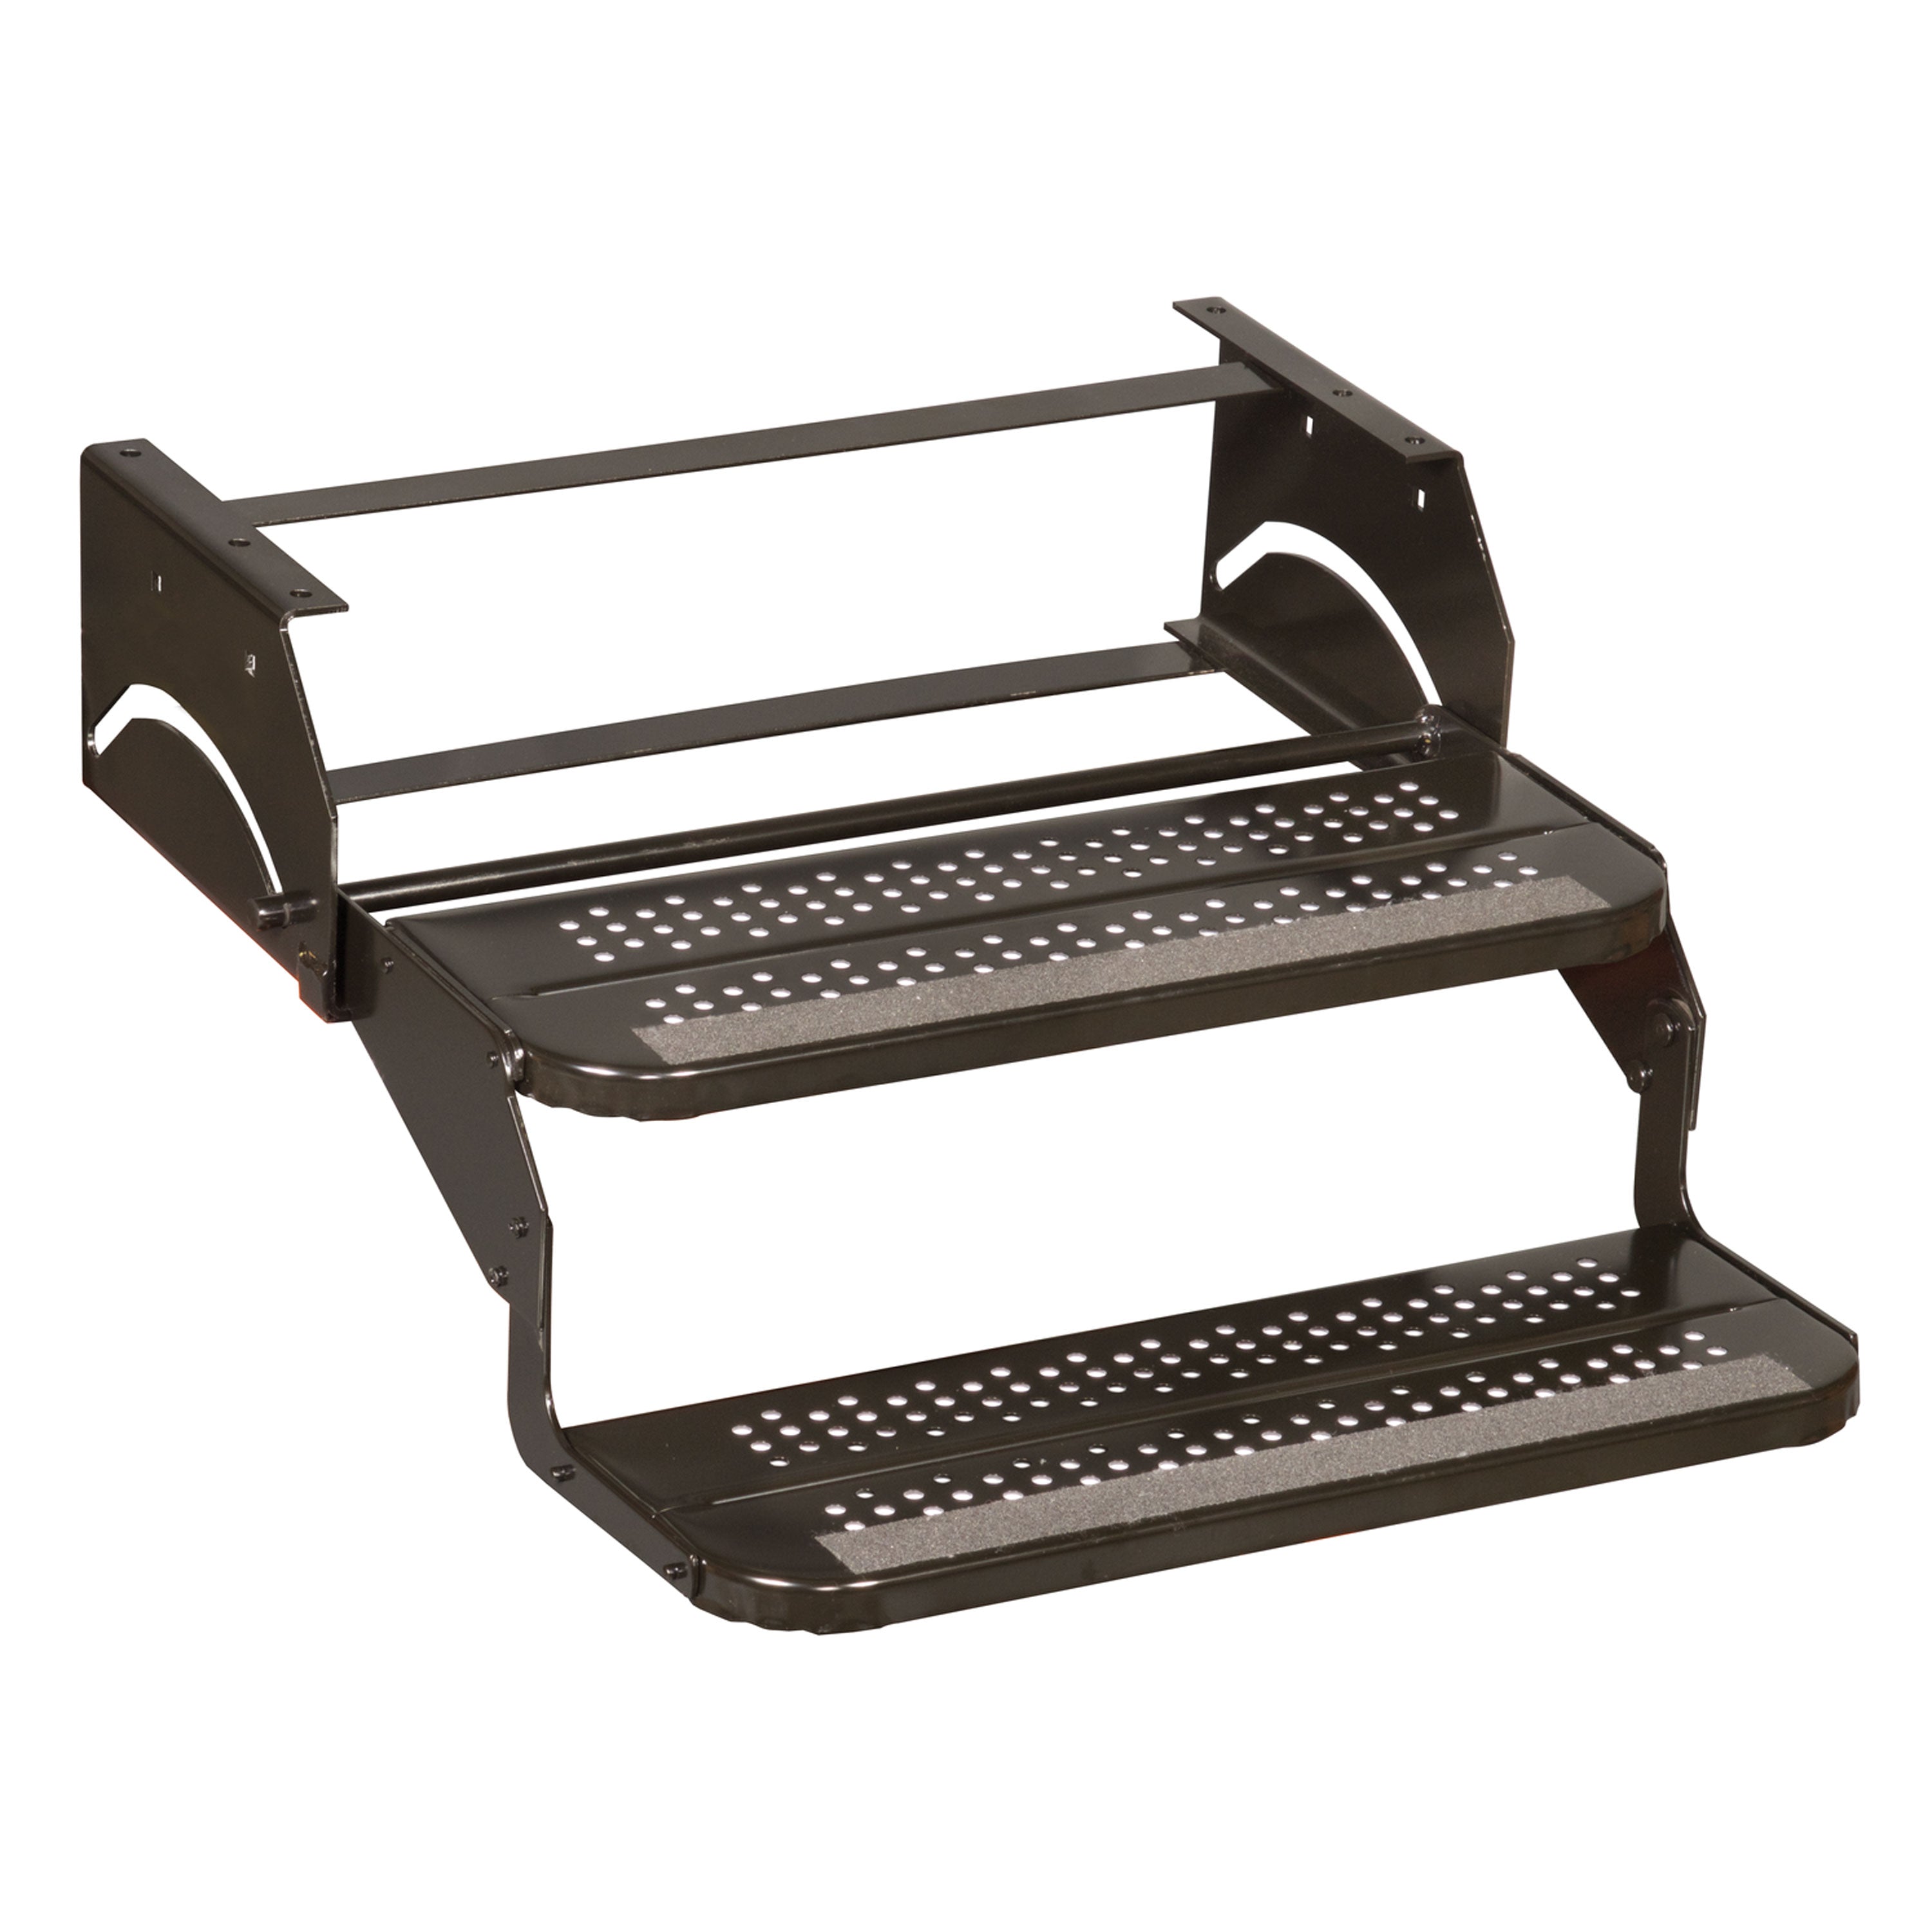 Elkhart Tool & Die 924-7 Standard Double Camper Step with 24" Wide Tread - 11.75" Drop and 7" Risers